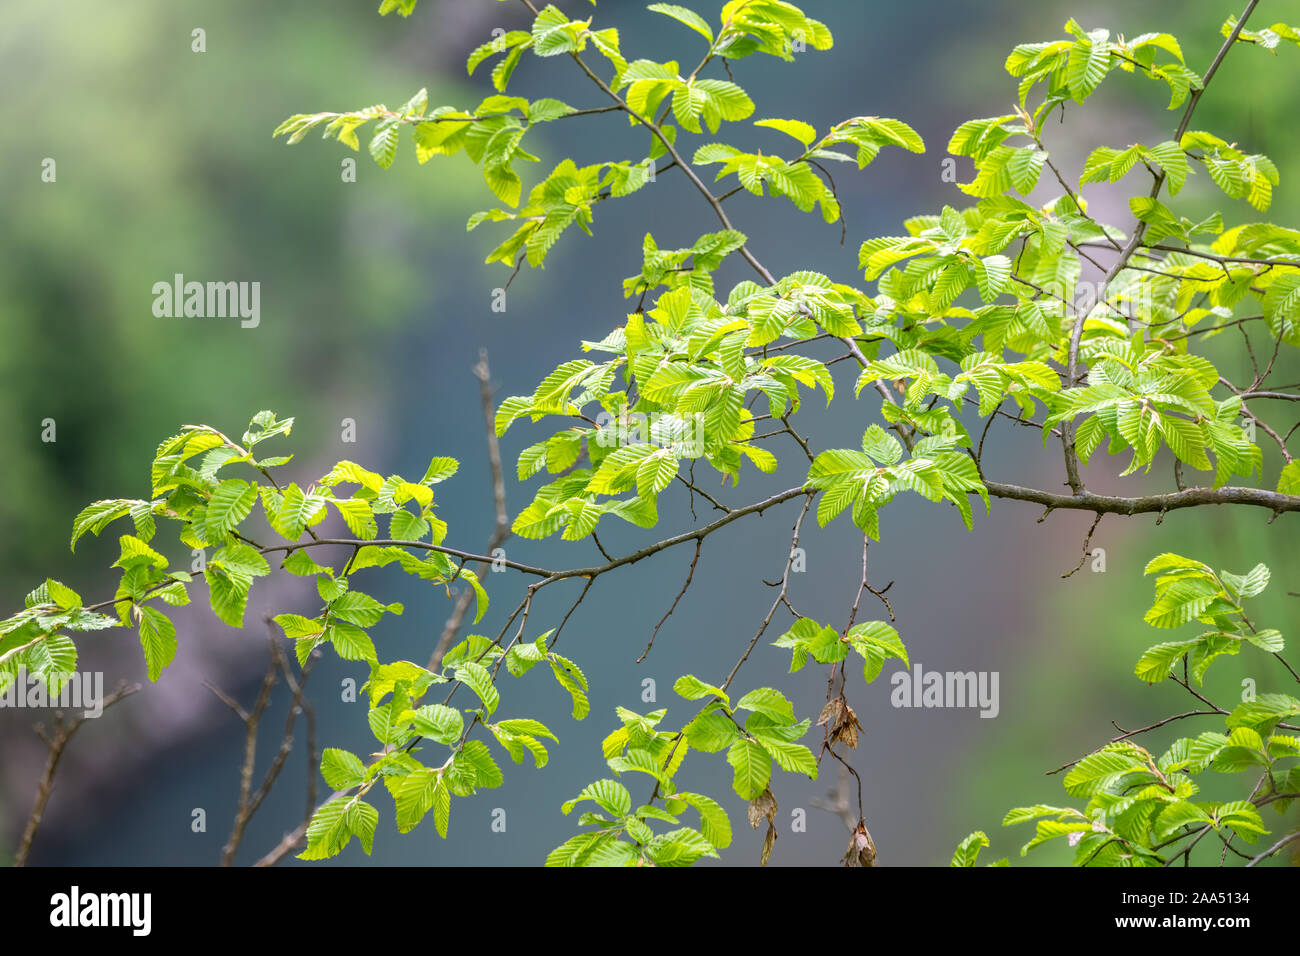 Green leaves of linden Tilia dasystyla on a green background. Tilia dasystyla is a deciduous lime tree species Stock Photo